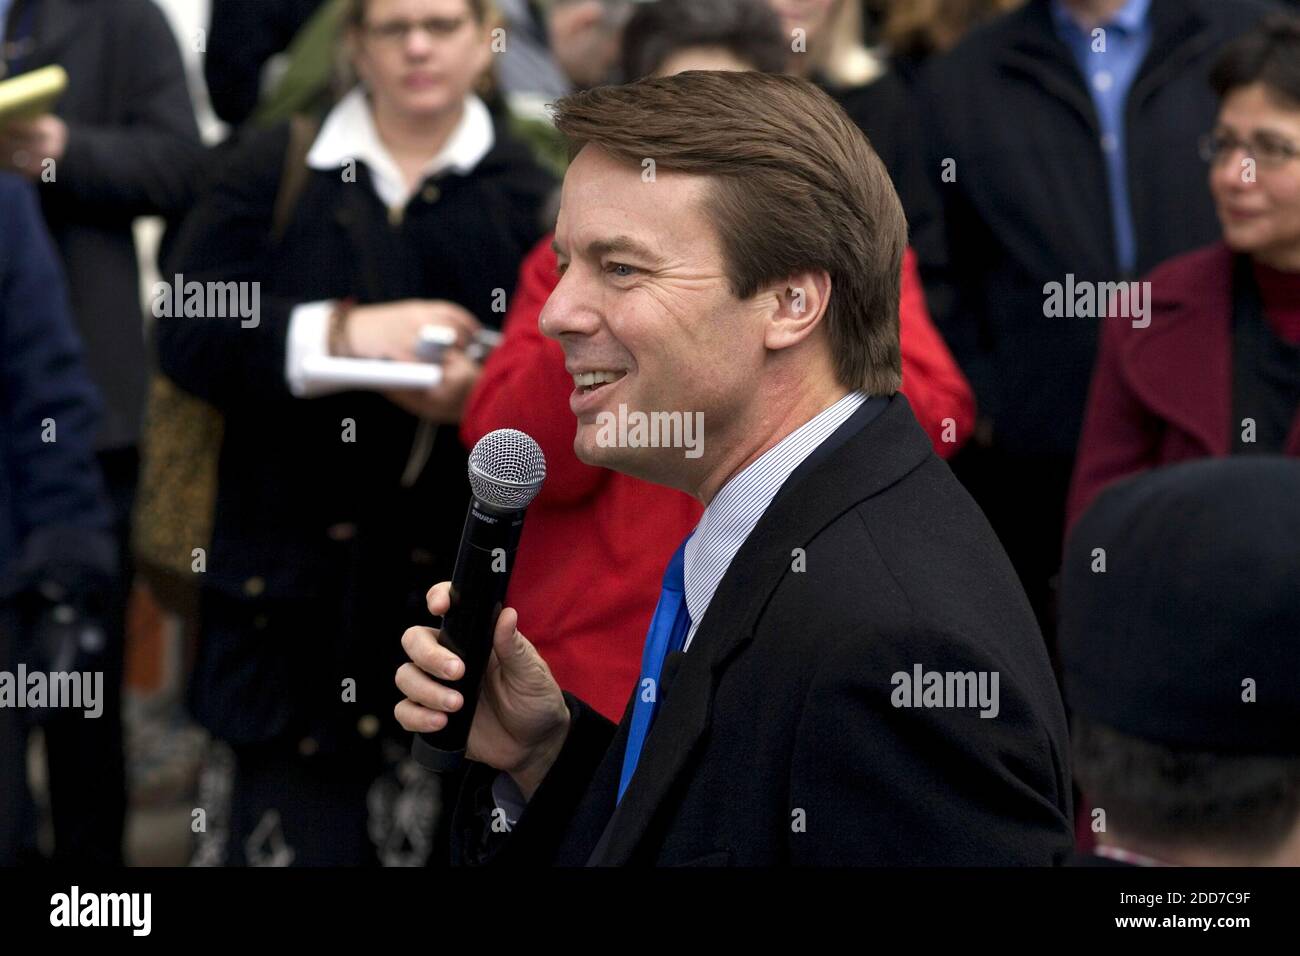 NO FILM, NO VIDEO, NO TV, NO DOCUMENTARY - Democratic presidential hopeful, former Senator John Edwards delivers his stump speech at the home of Peter and Jo Smith in Bedford, NH, USA, on Monday, January 7, 2008. Photo by Robert Willett/Raleigh News & Observer/MCT/ABACAPRESS.COM Stock Photo